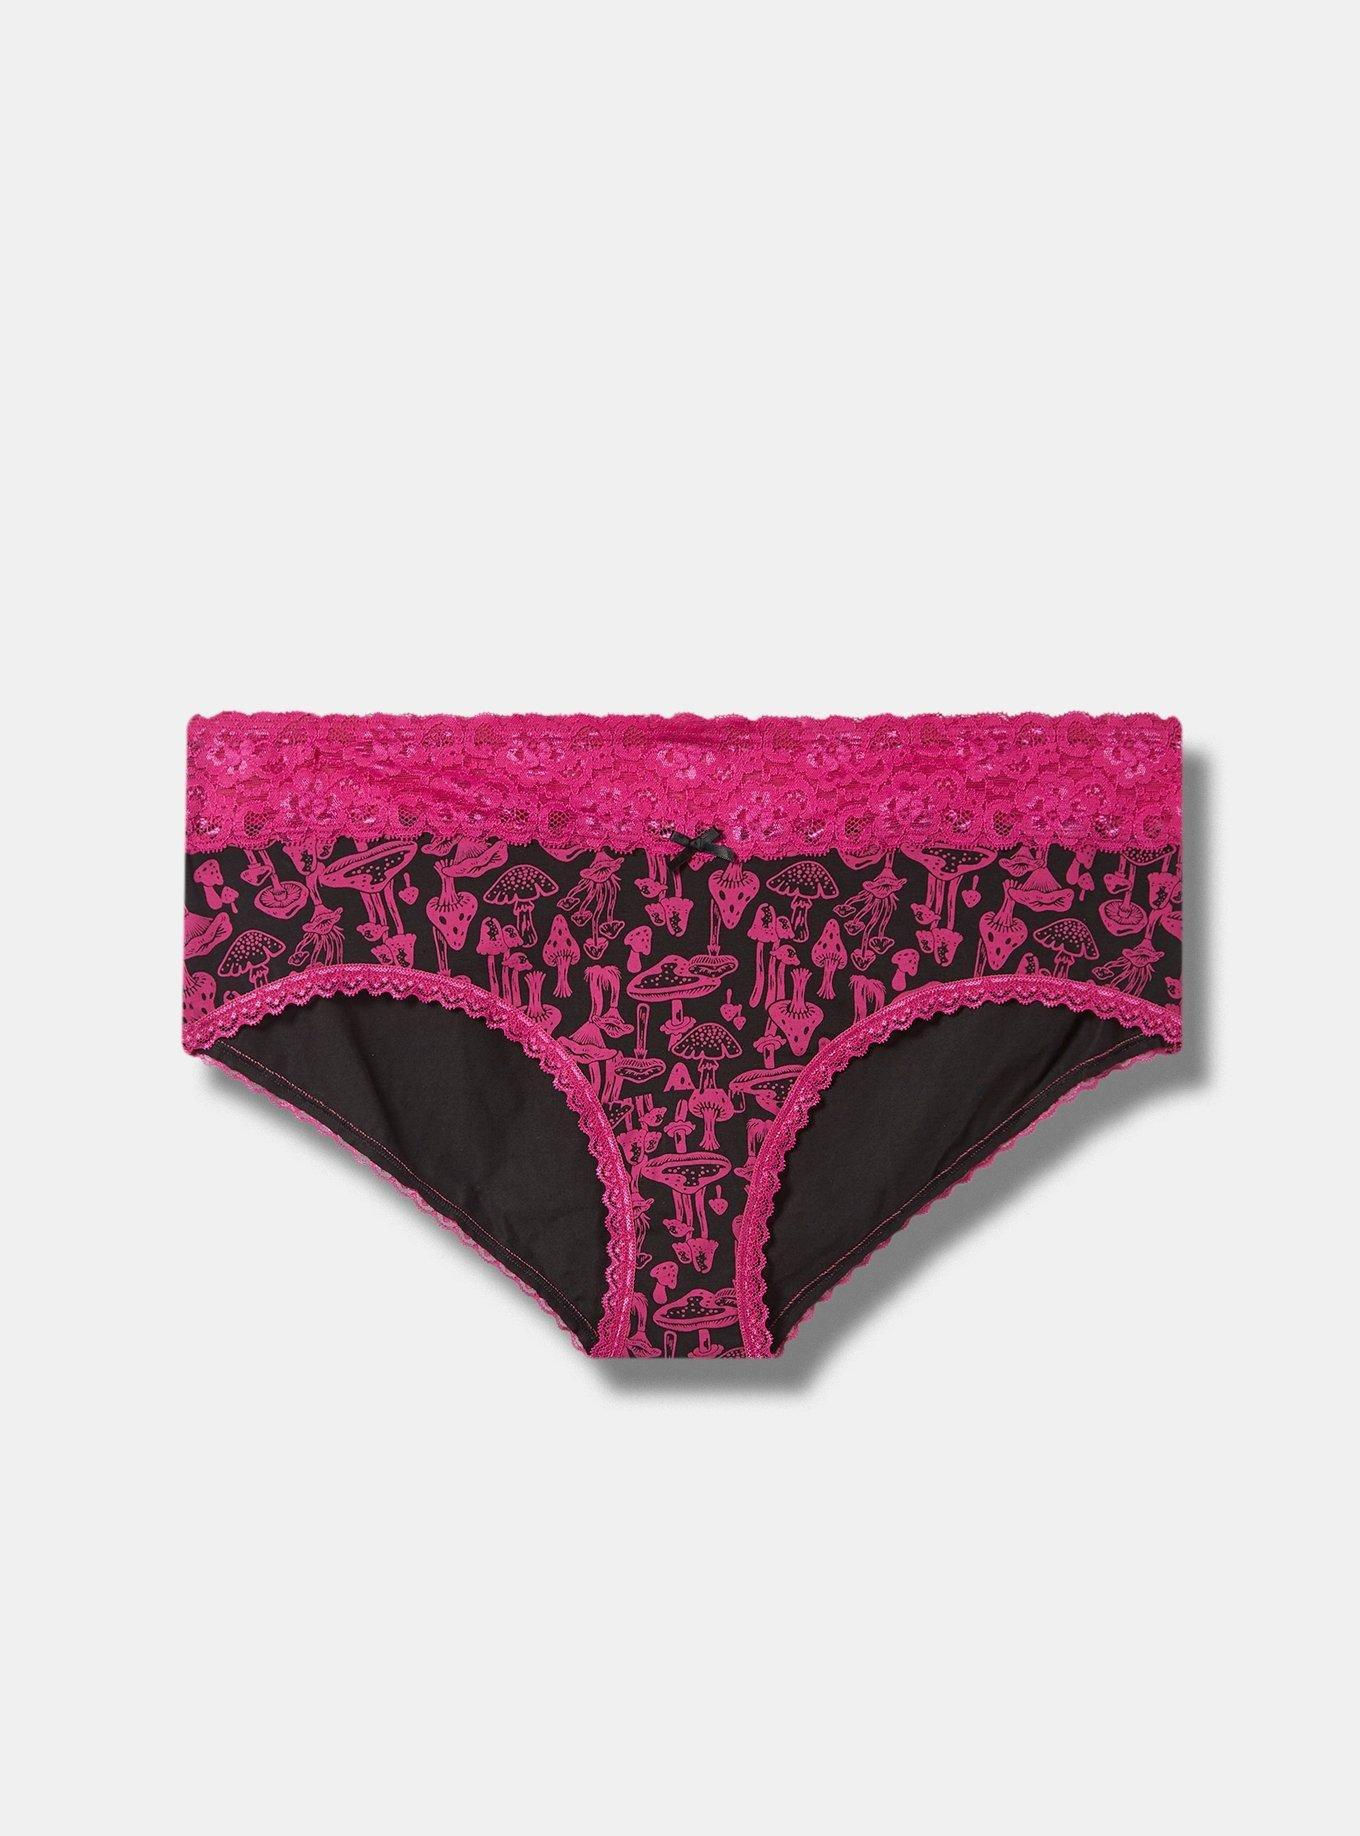 Microfiber and Lace Trim Cheeky Panty - Candy pink